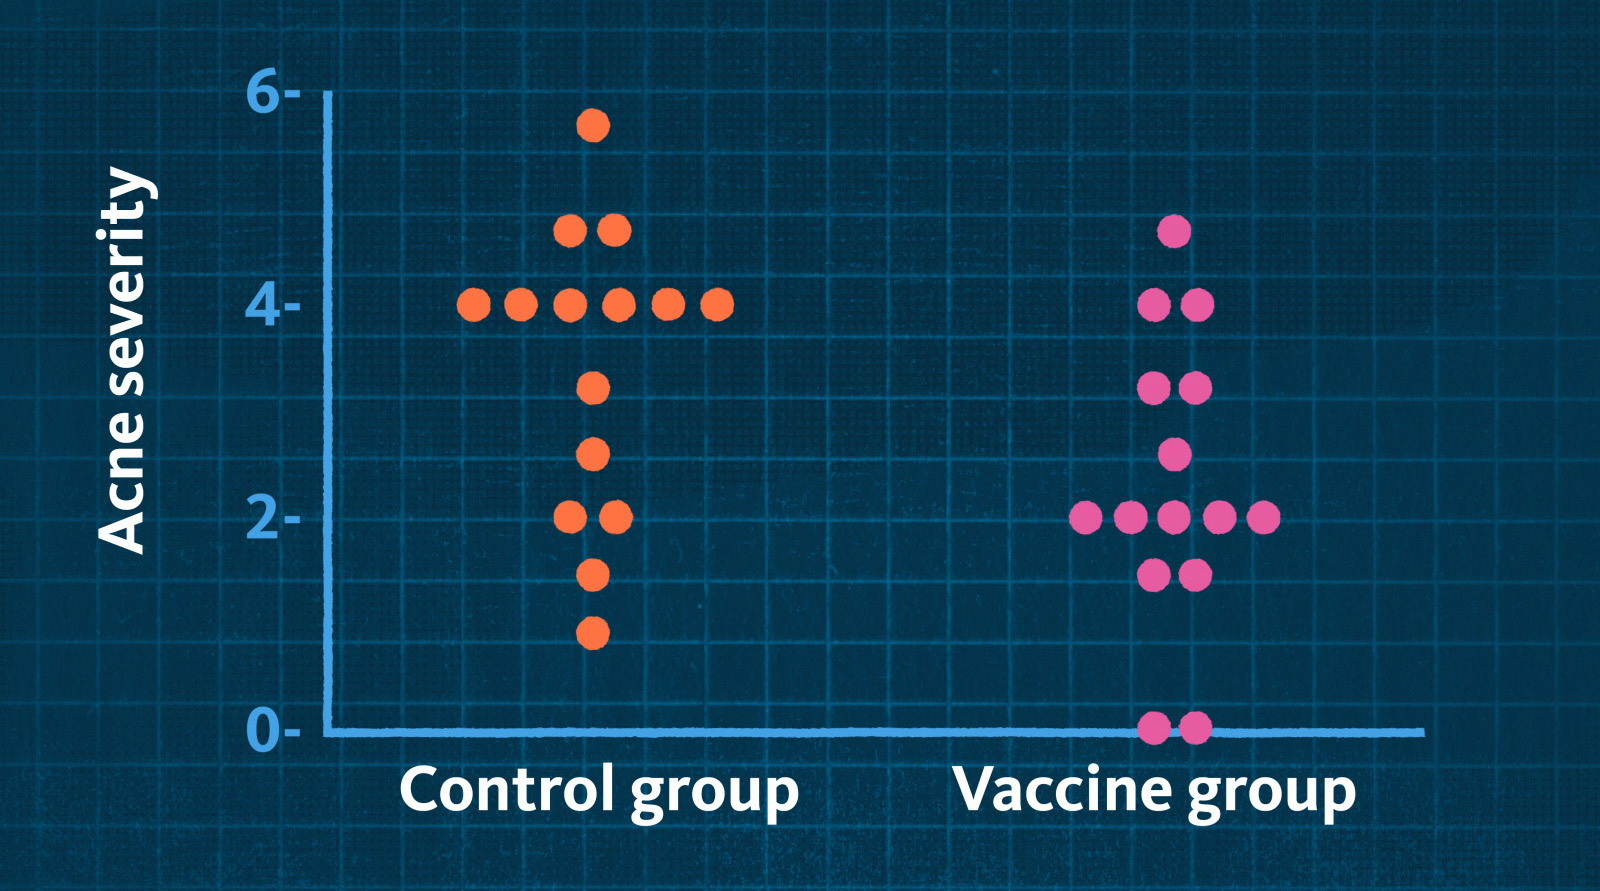 Chart showing the acne severity of the control group compared to the vaccine group - the vaccine group has lower acne severity.